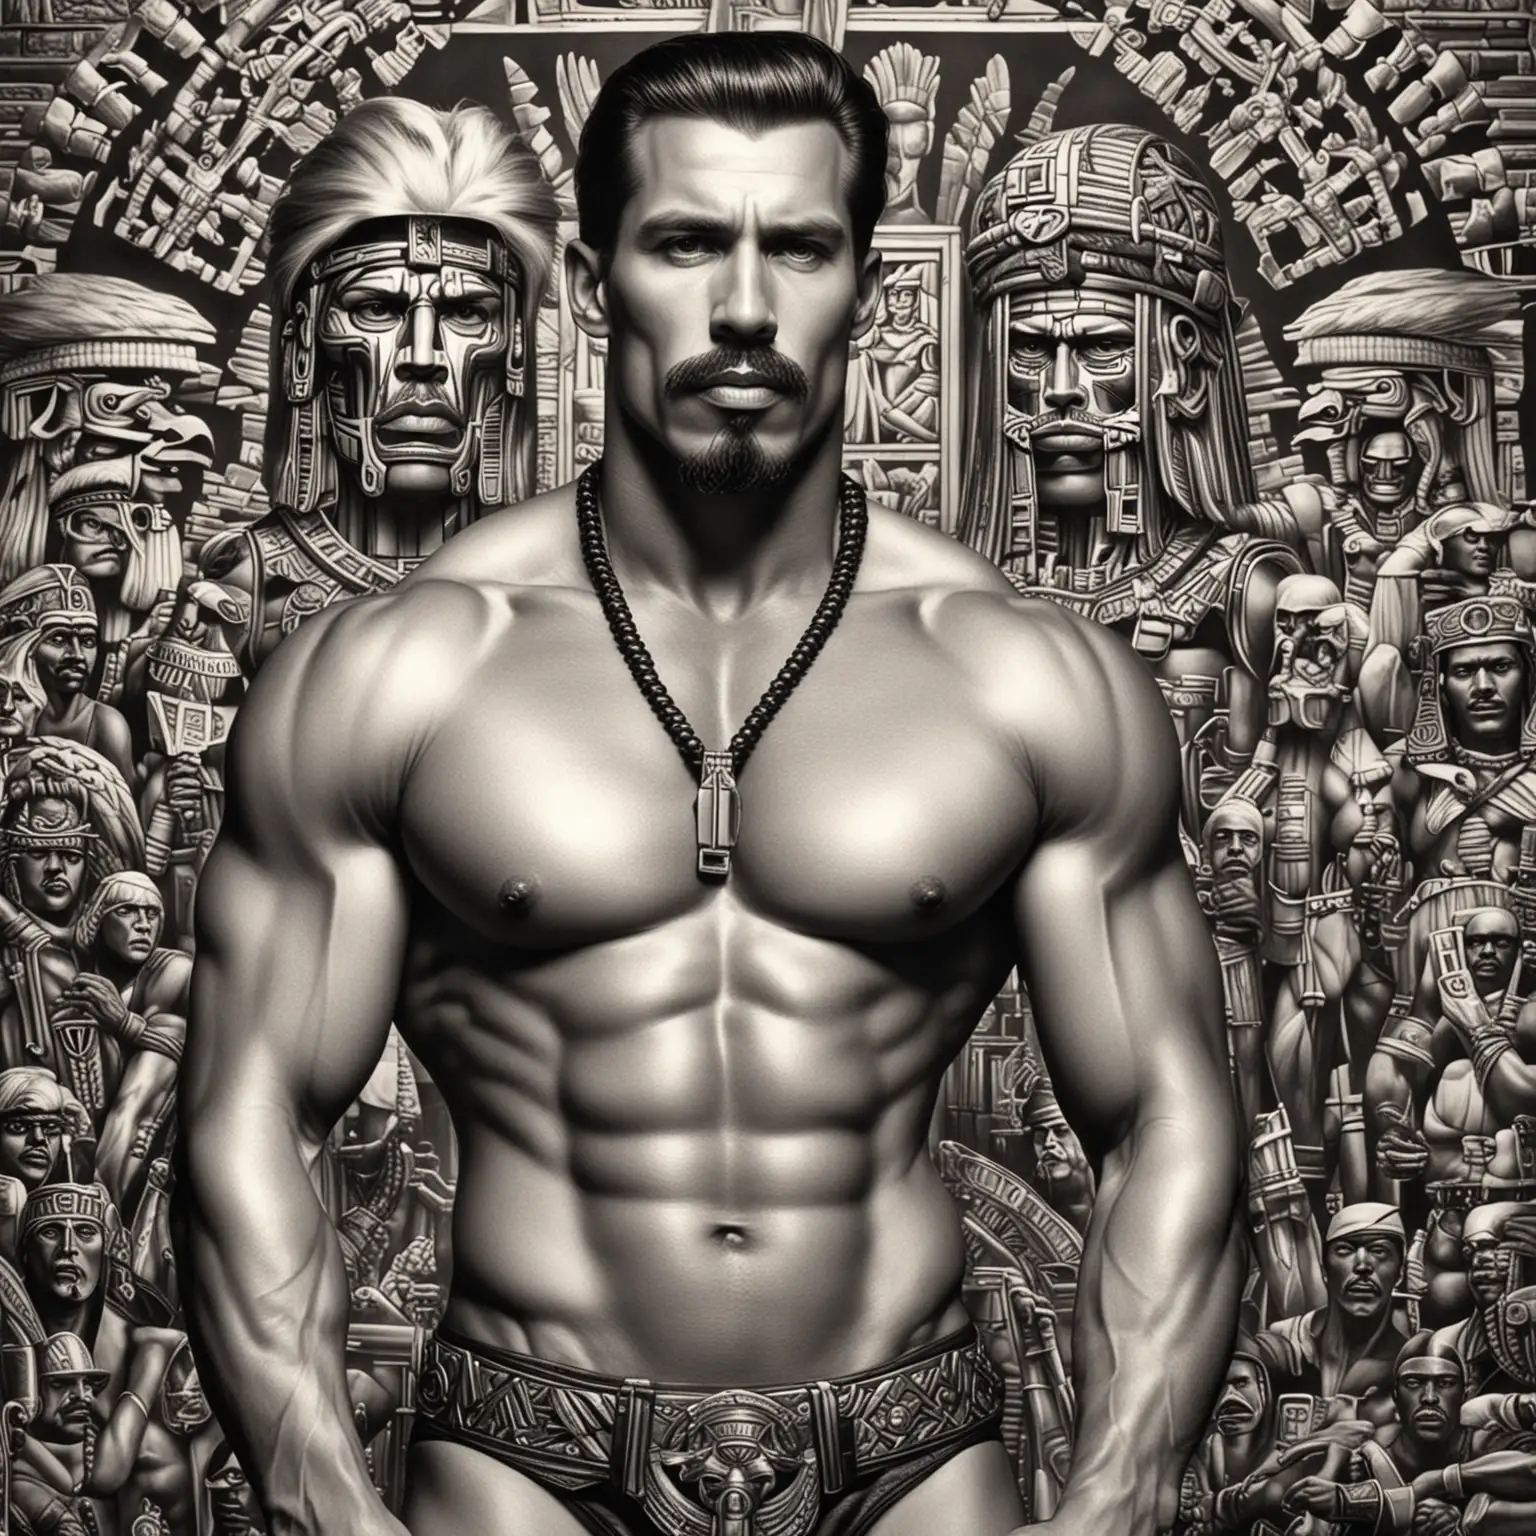 Tom of Finland Aztec Artistic Illustration Masculine Figures in Tribal Setting